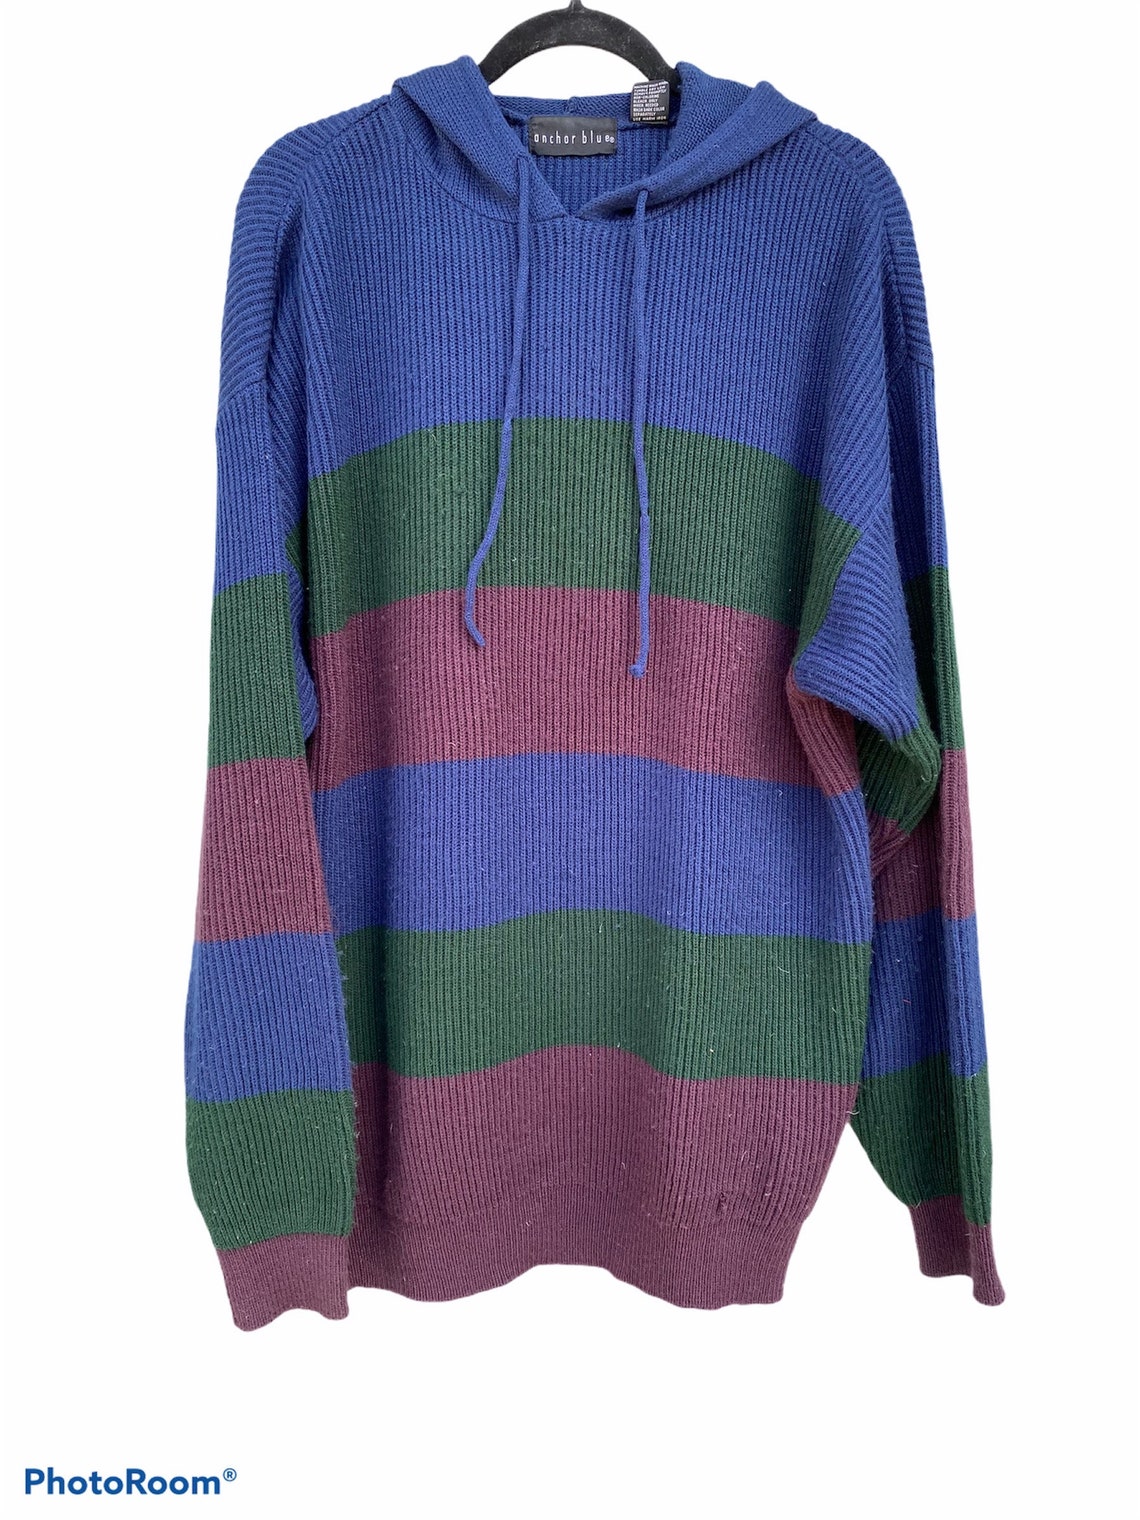 Vintage Anchor Blue Striped Hoodie Sweater Hooded Purple Blue - Etsy ...